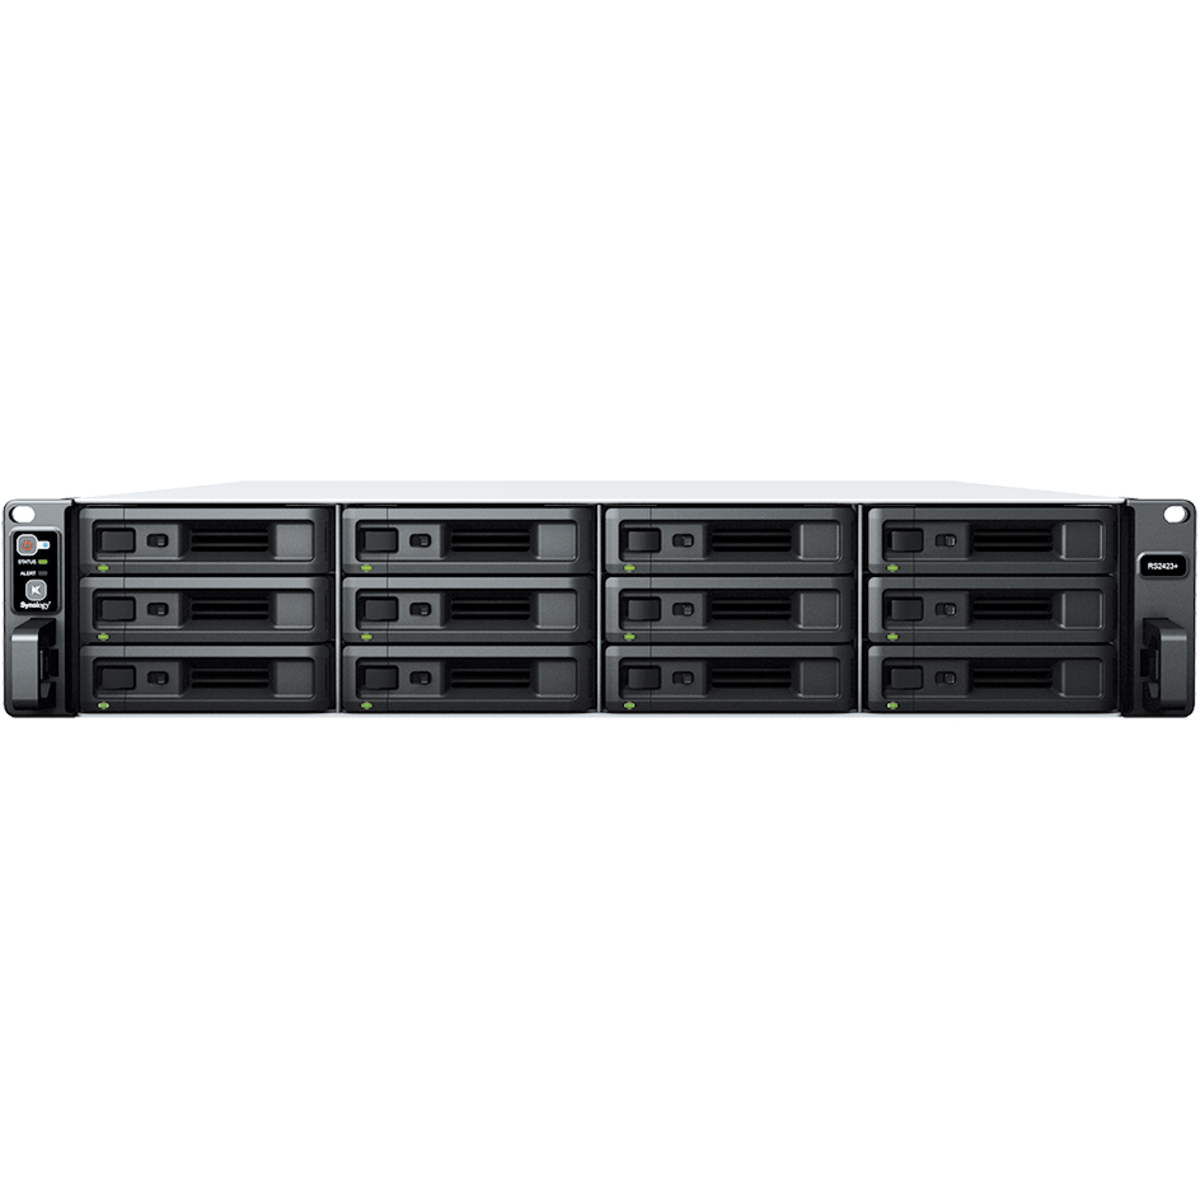 buy Synology RackStation RS2423+ 192tb RackMount NAS - Network Attached Storage Device 12x16000gb Seagate IronWolf Pro ST16000NT001 3.5 7200rpm SATA 6Gb/s HDD NAS Class Drives Installed - Burn-In Tested - ON SALE - nas headquarters buy network attached storage server device das new raid-5 free shipping simply usa RackStation RS2423+